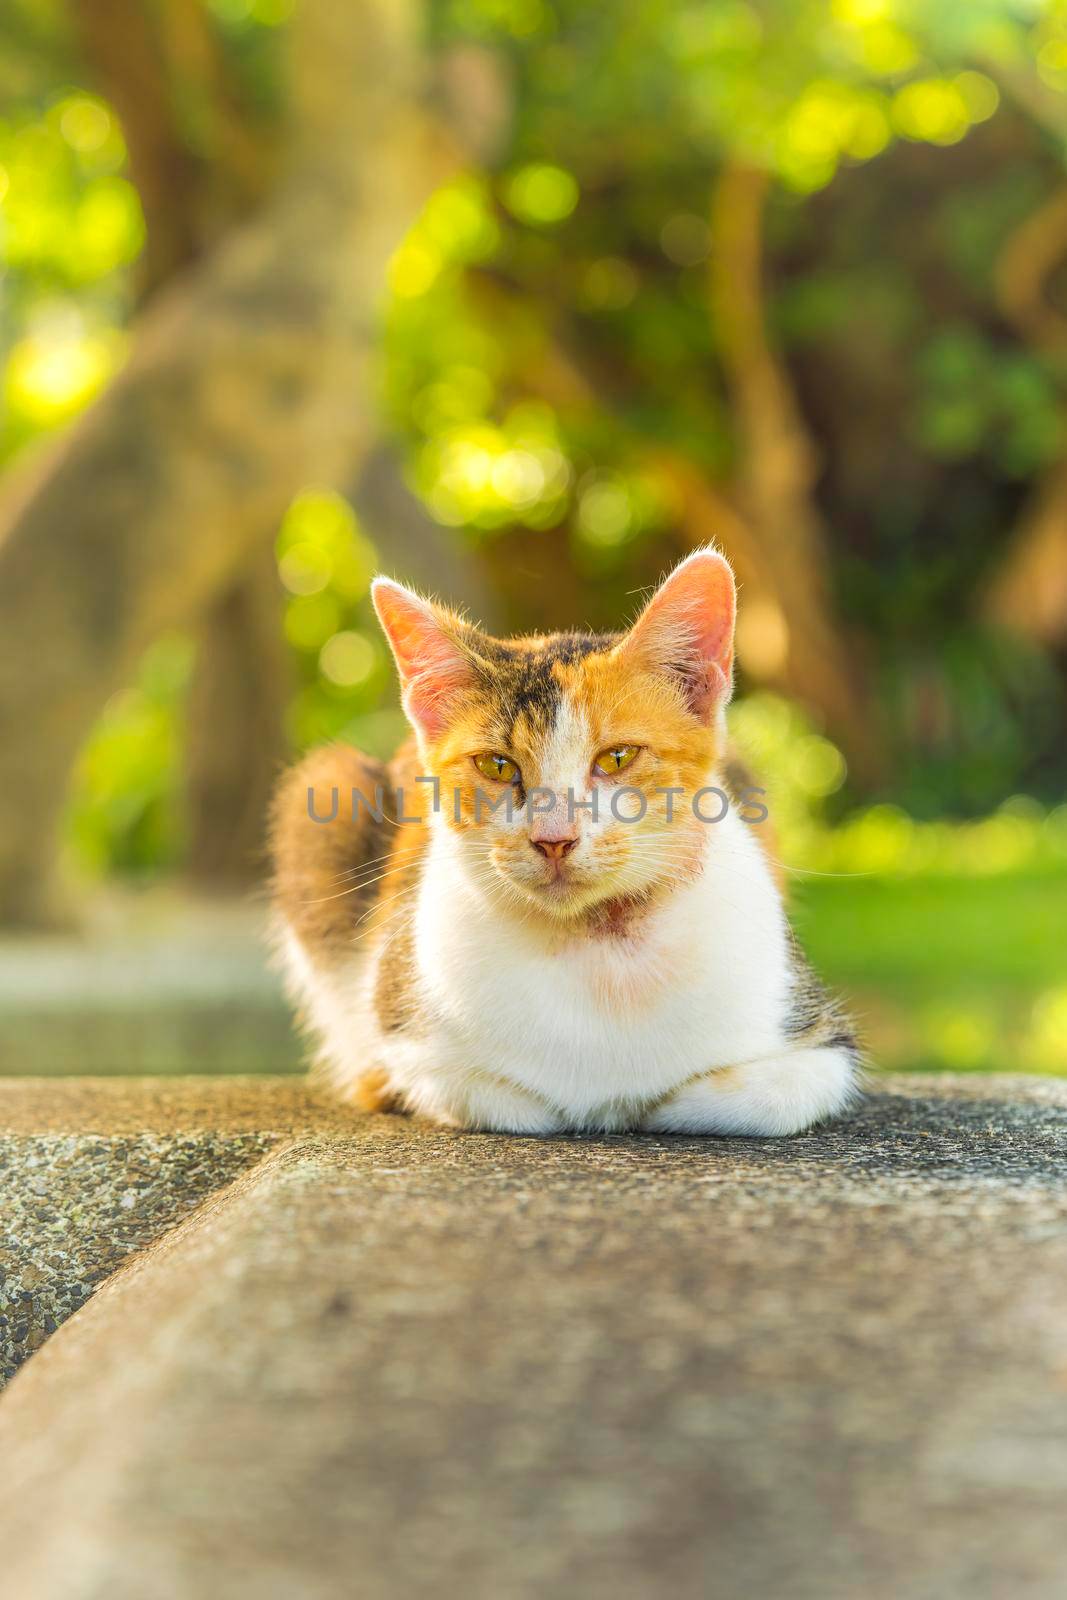 Orange and white tabby cat lying staring at the lens against a shallow depth of field background.